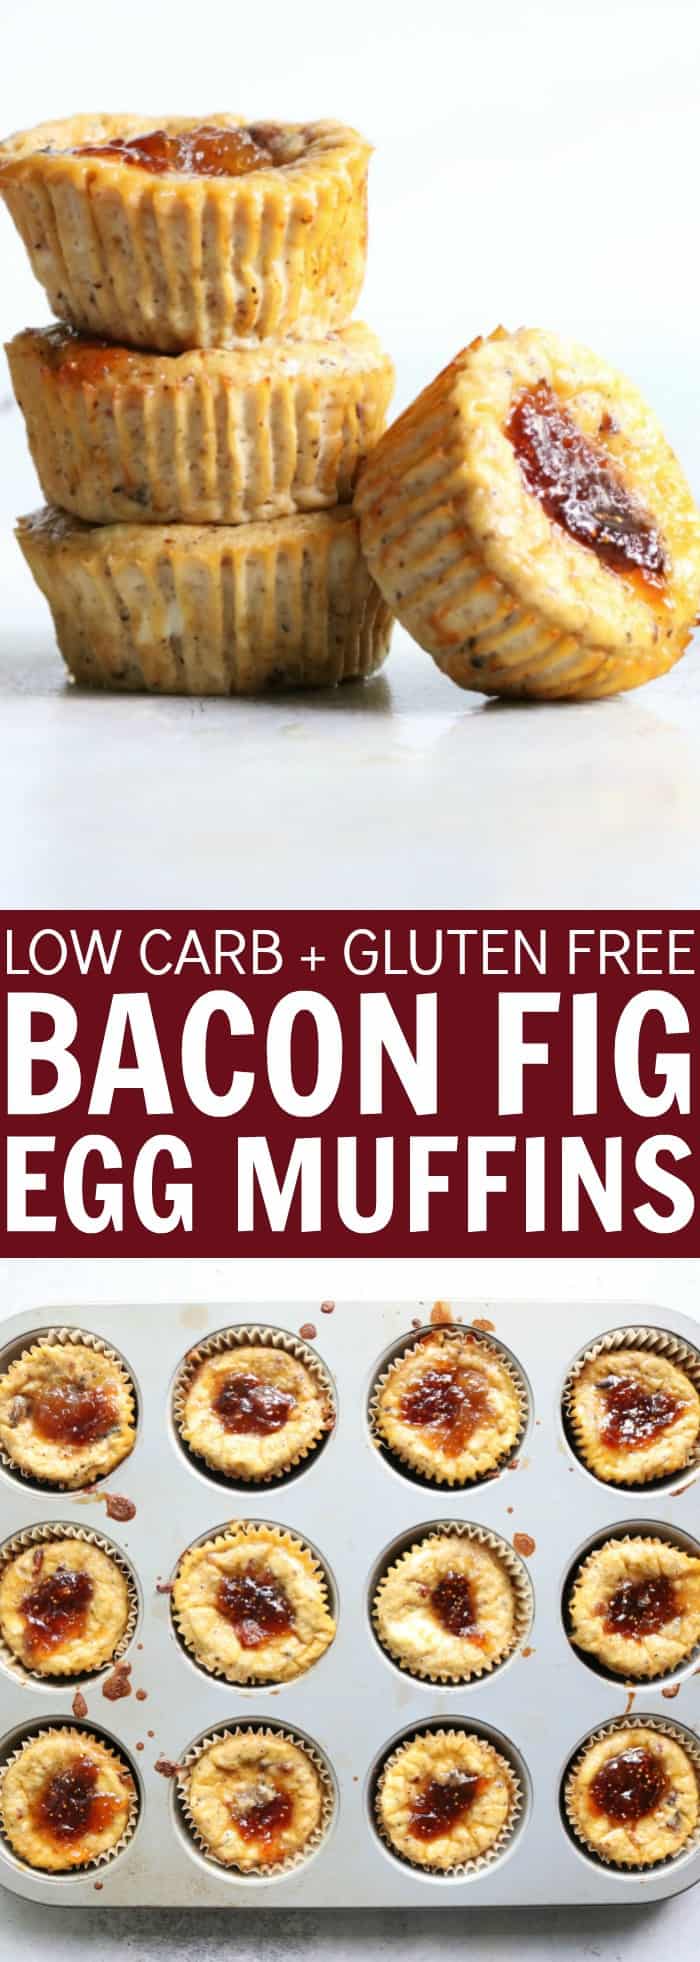 You'll love these easy Bacon + Blue Cheese Egg Muffins!! They're perfect for a tasty low carb + gluten free grab and go breakfast! thetoastedpinenut.com #thetoastedpinenut #lowcarb #egg #muffin #quiche #cups #bacon #caramelizedonion #bluecheese #figjam #breakfast #brunch #healthy #glutenfree #grainfree